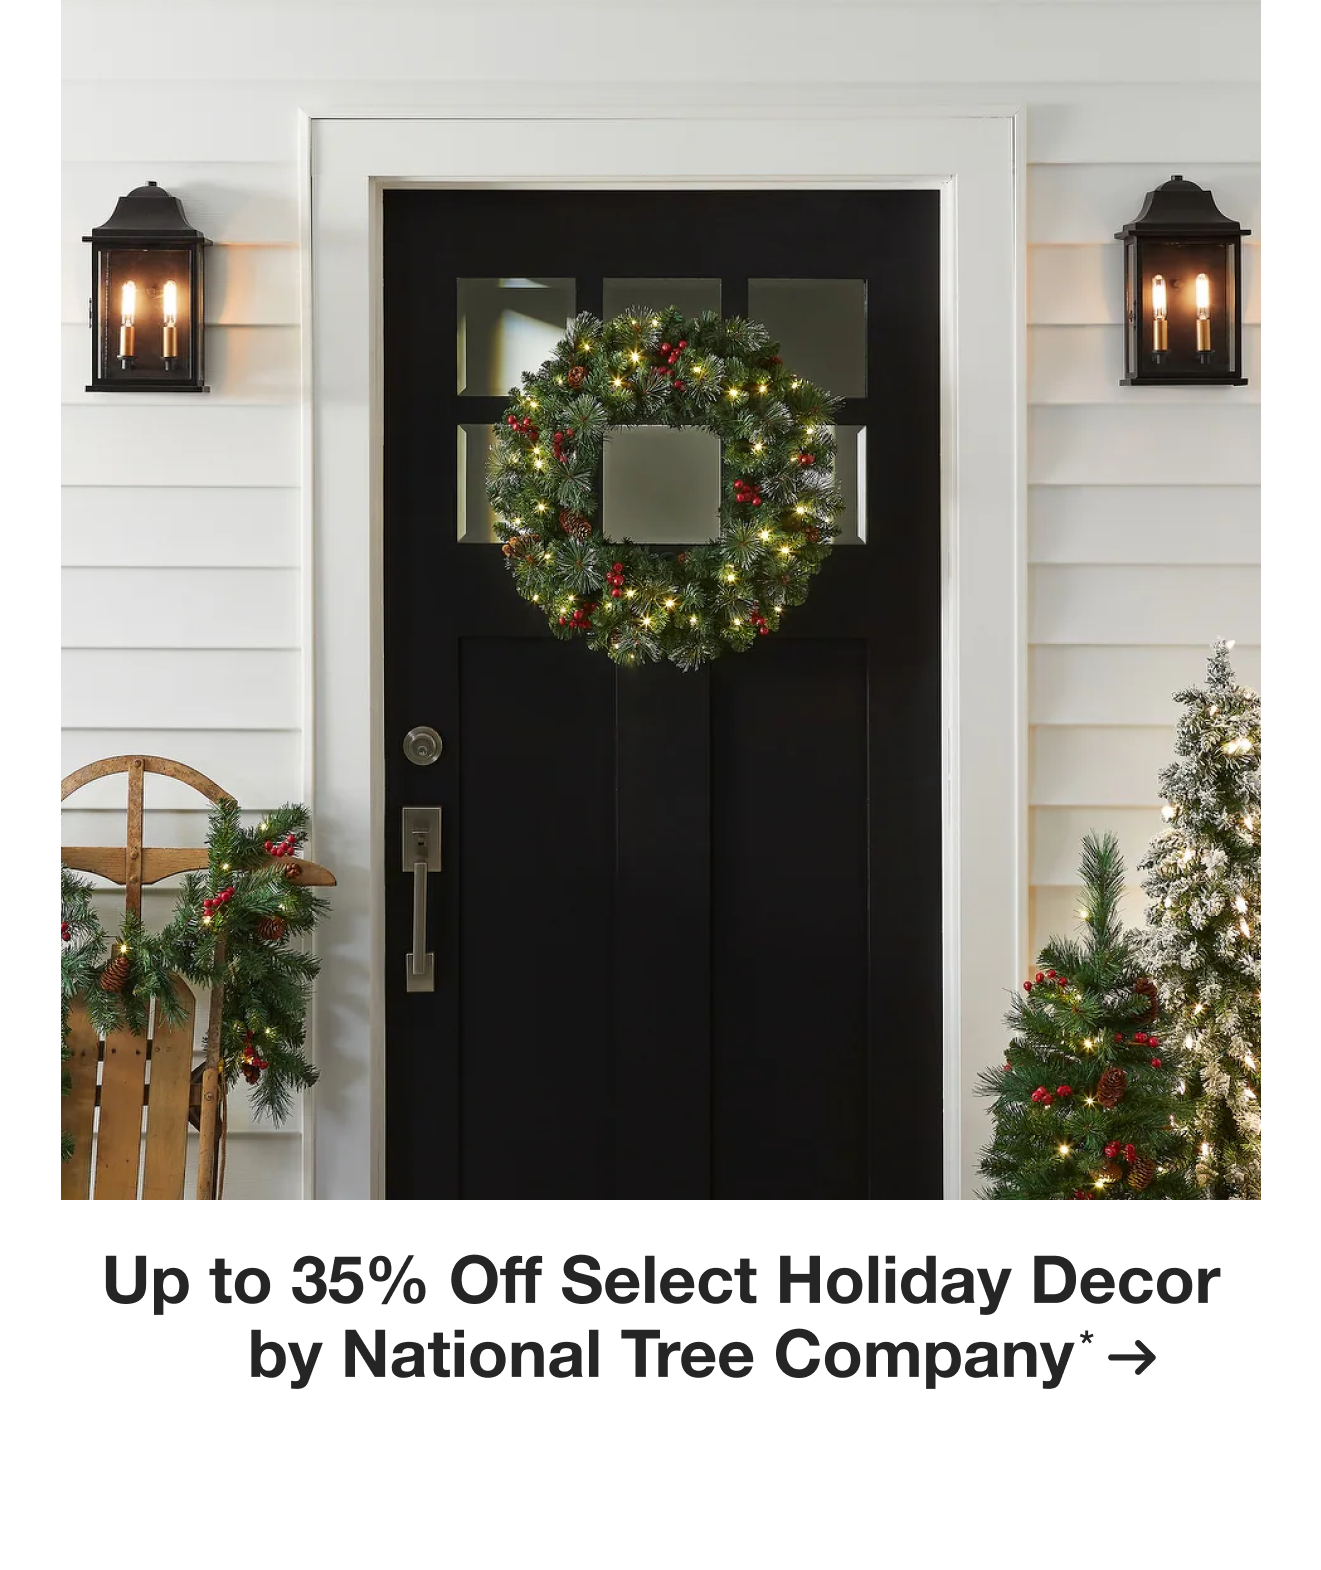 Up to 35% Off Select Home Decor by National Tree*